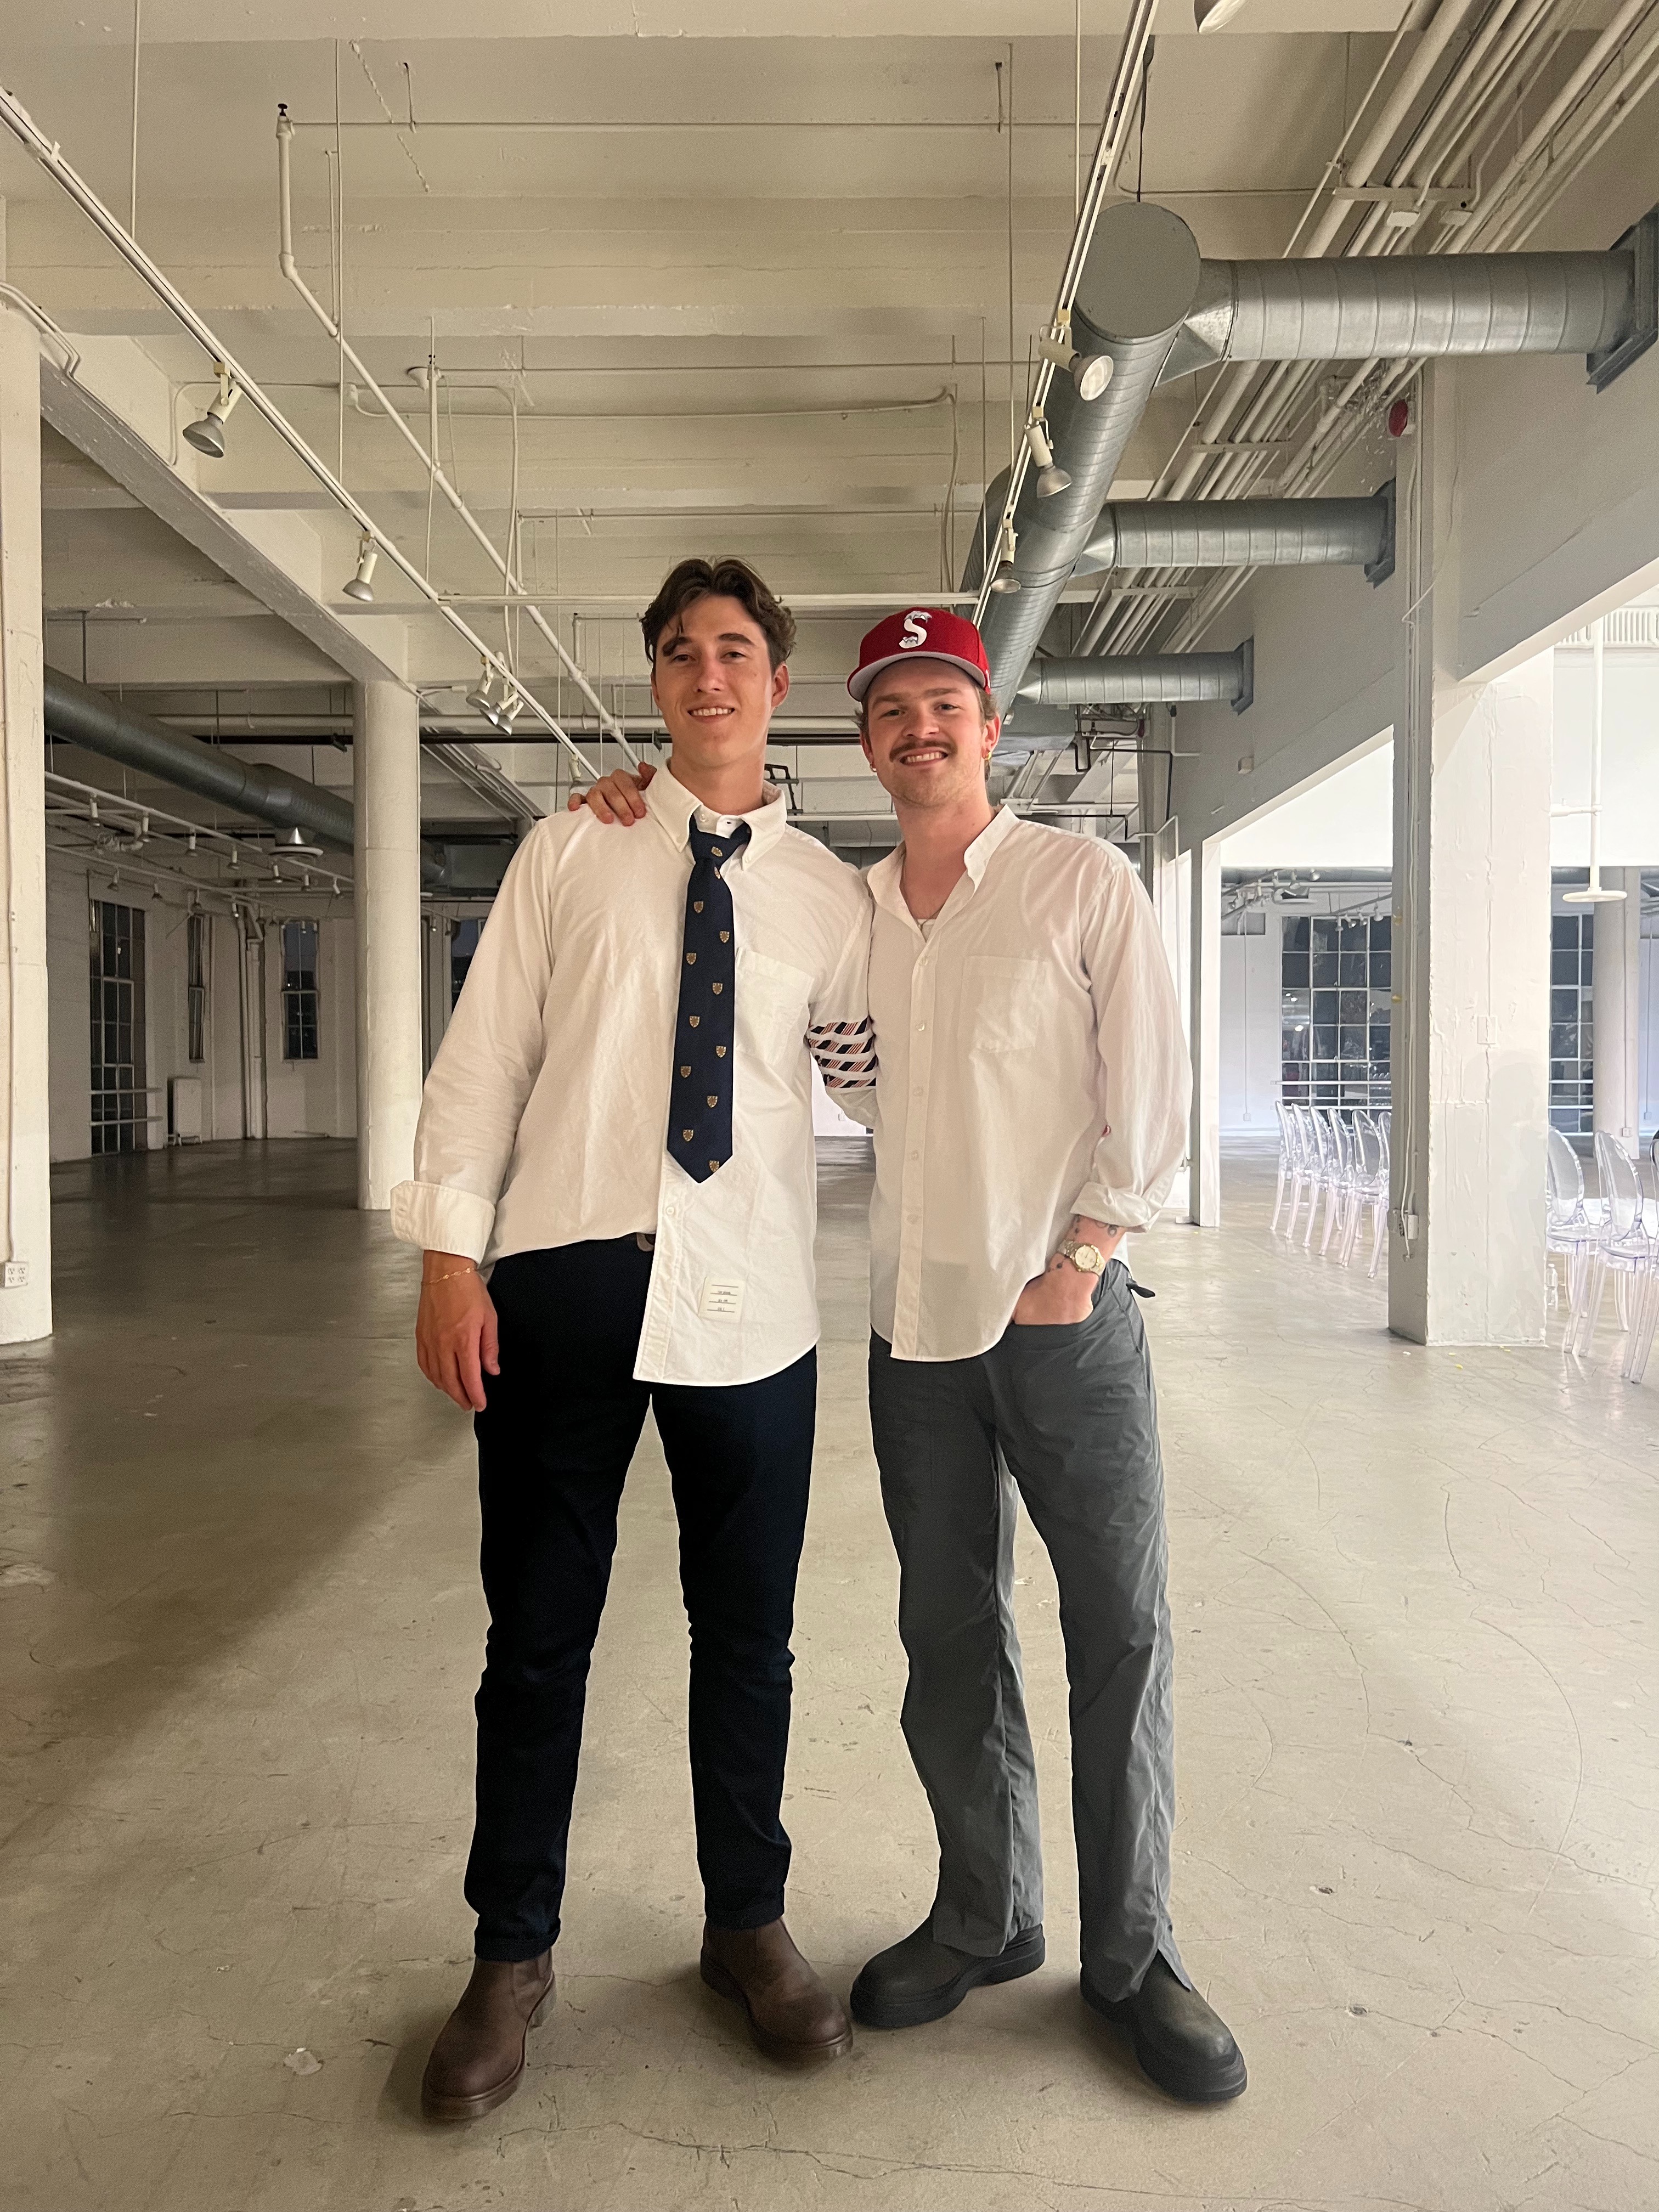 Cole Moscaret and Alexander Novak standing outside in a parking garage facing the camera